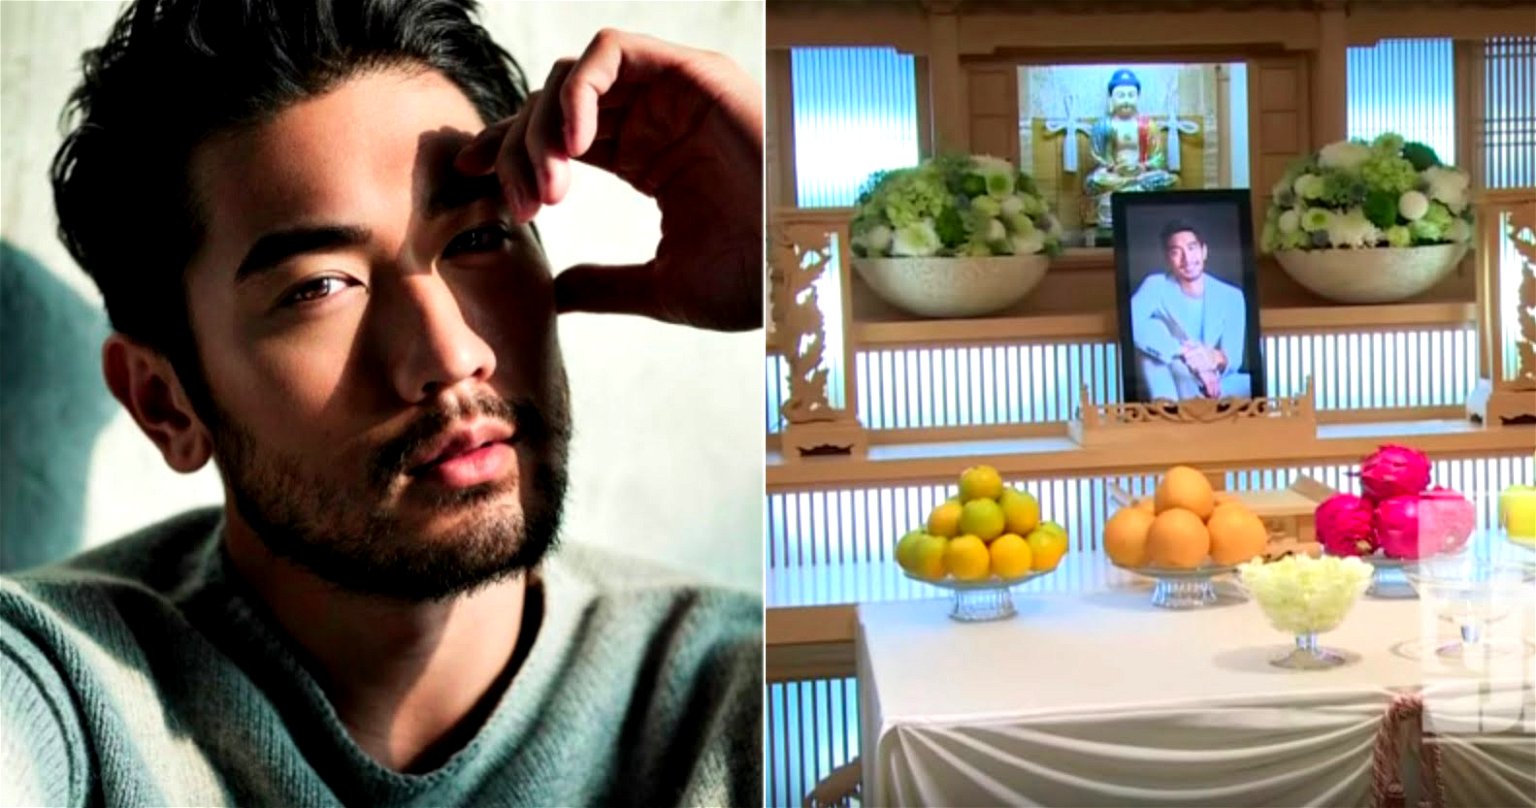 Heartbreaking Video Shows Godfrey Gao’s Body Going From the Airport to Funeral Home